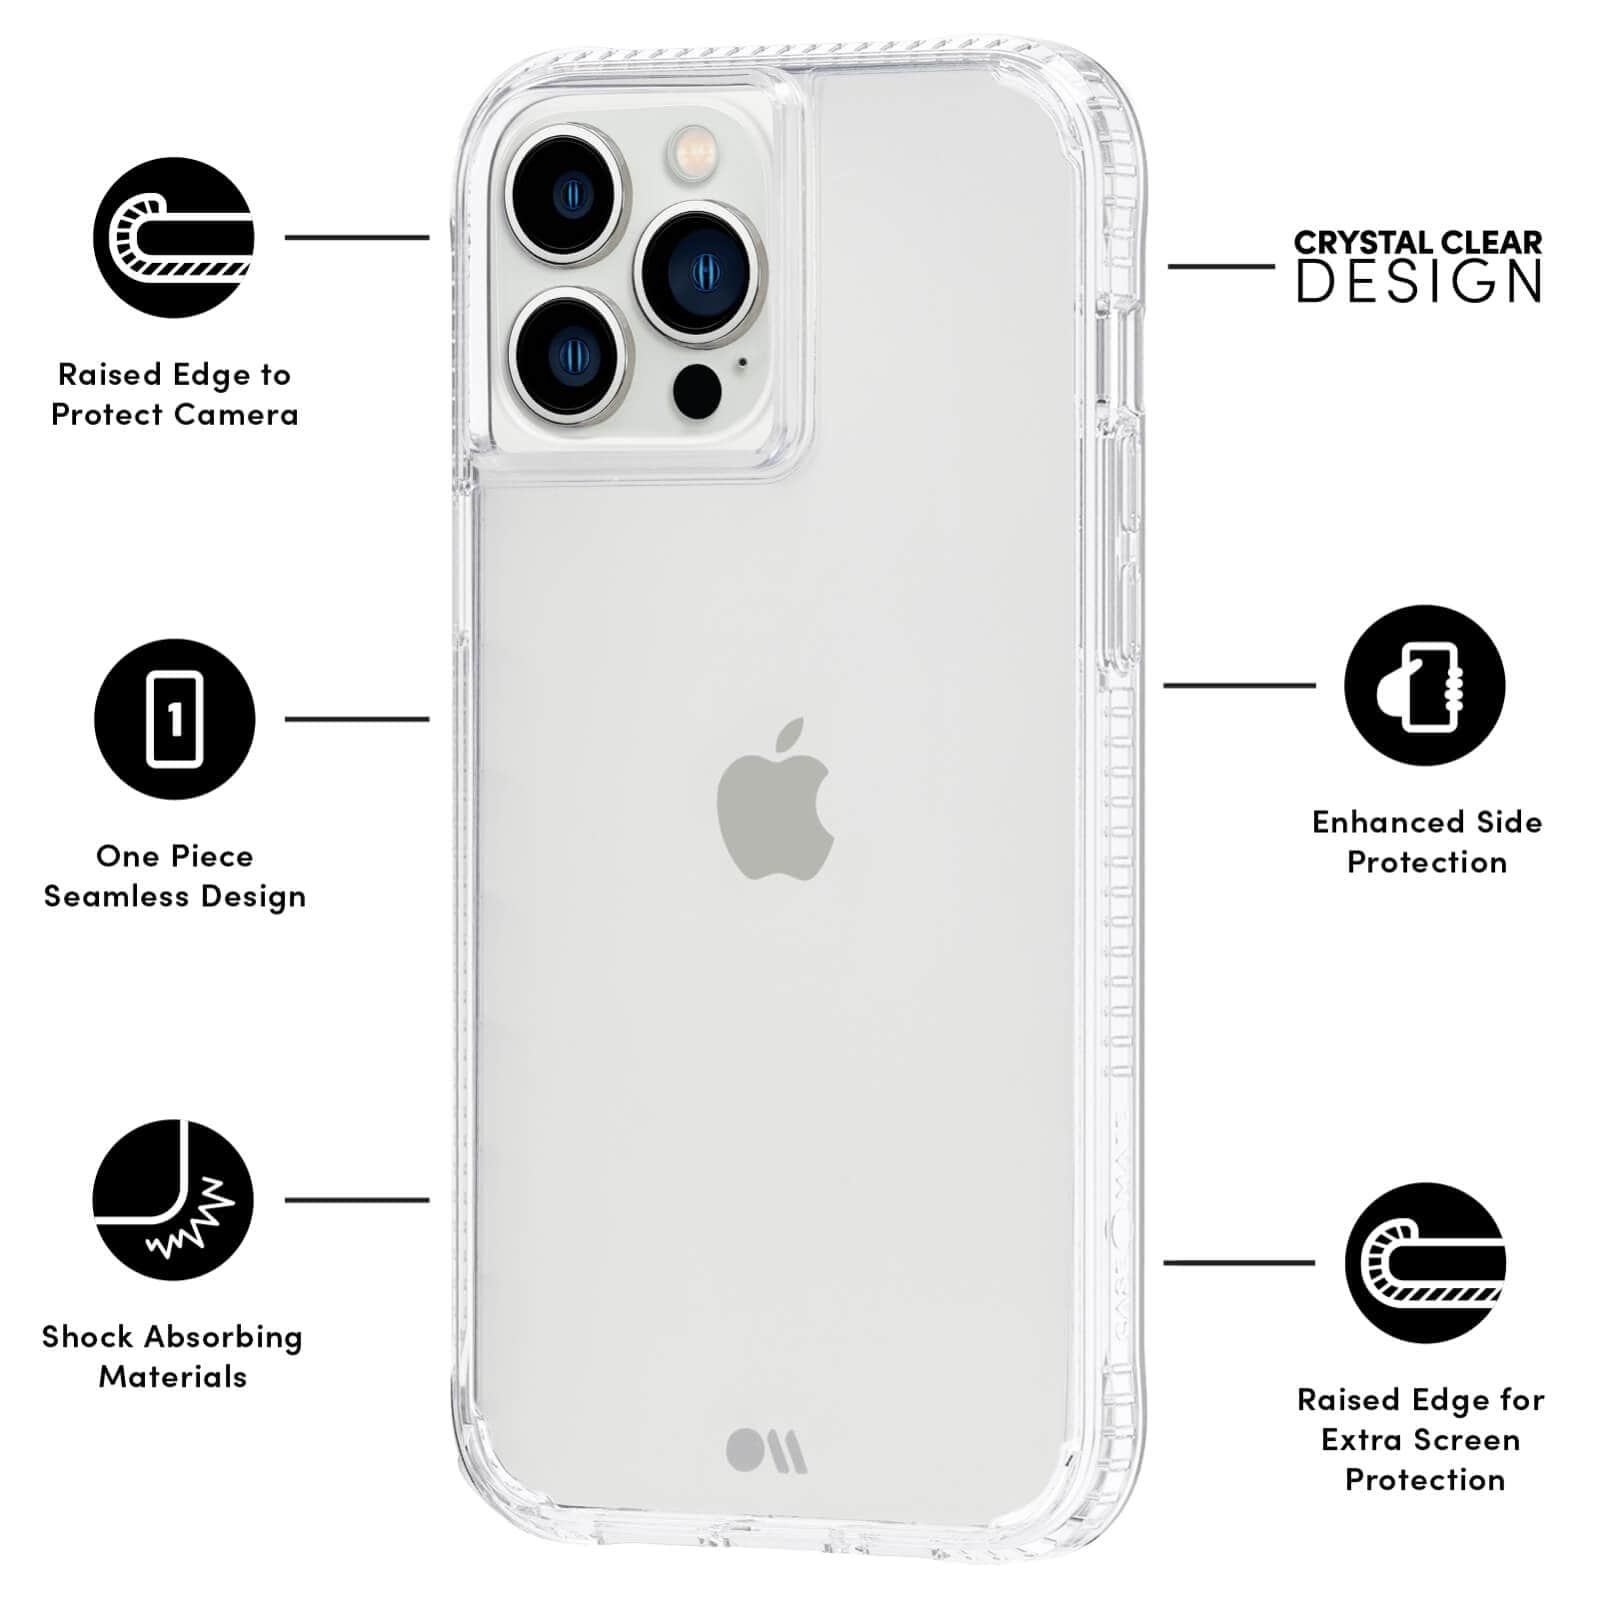 FEATURES: RAISED EDGE TO PROTECT CAMERA, ONE PIECE SEAMLESS DESIGN, SHOCK ABSORBING MATERIALS, CRYSTAL CLEAR DESIGN, ENHANCED SIDE PROTECTION, RAISED EDGE FOR EXTRA SCREEN PROTECTION. COLOR::CLEAR